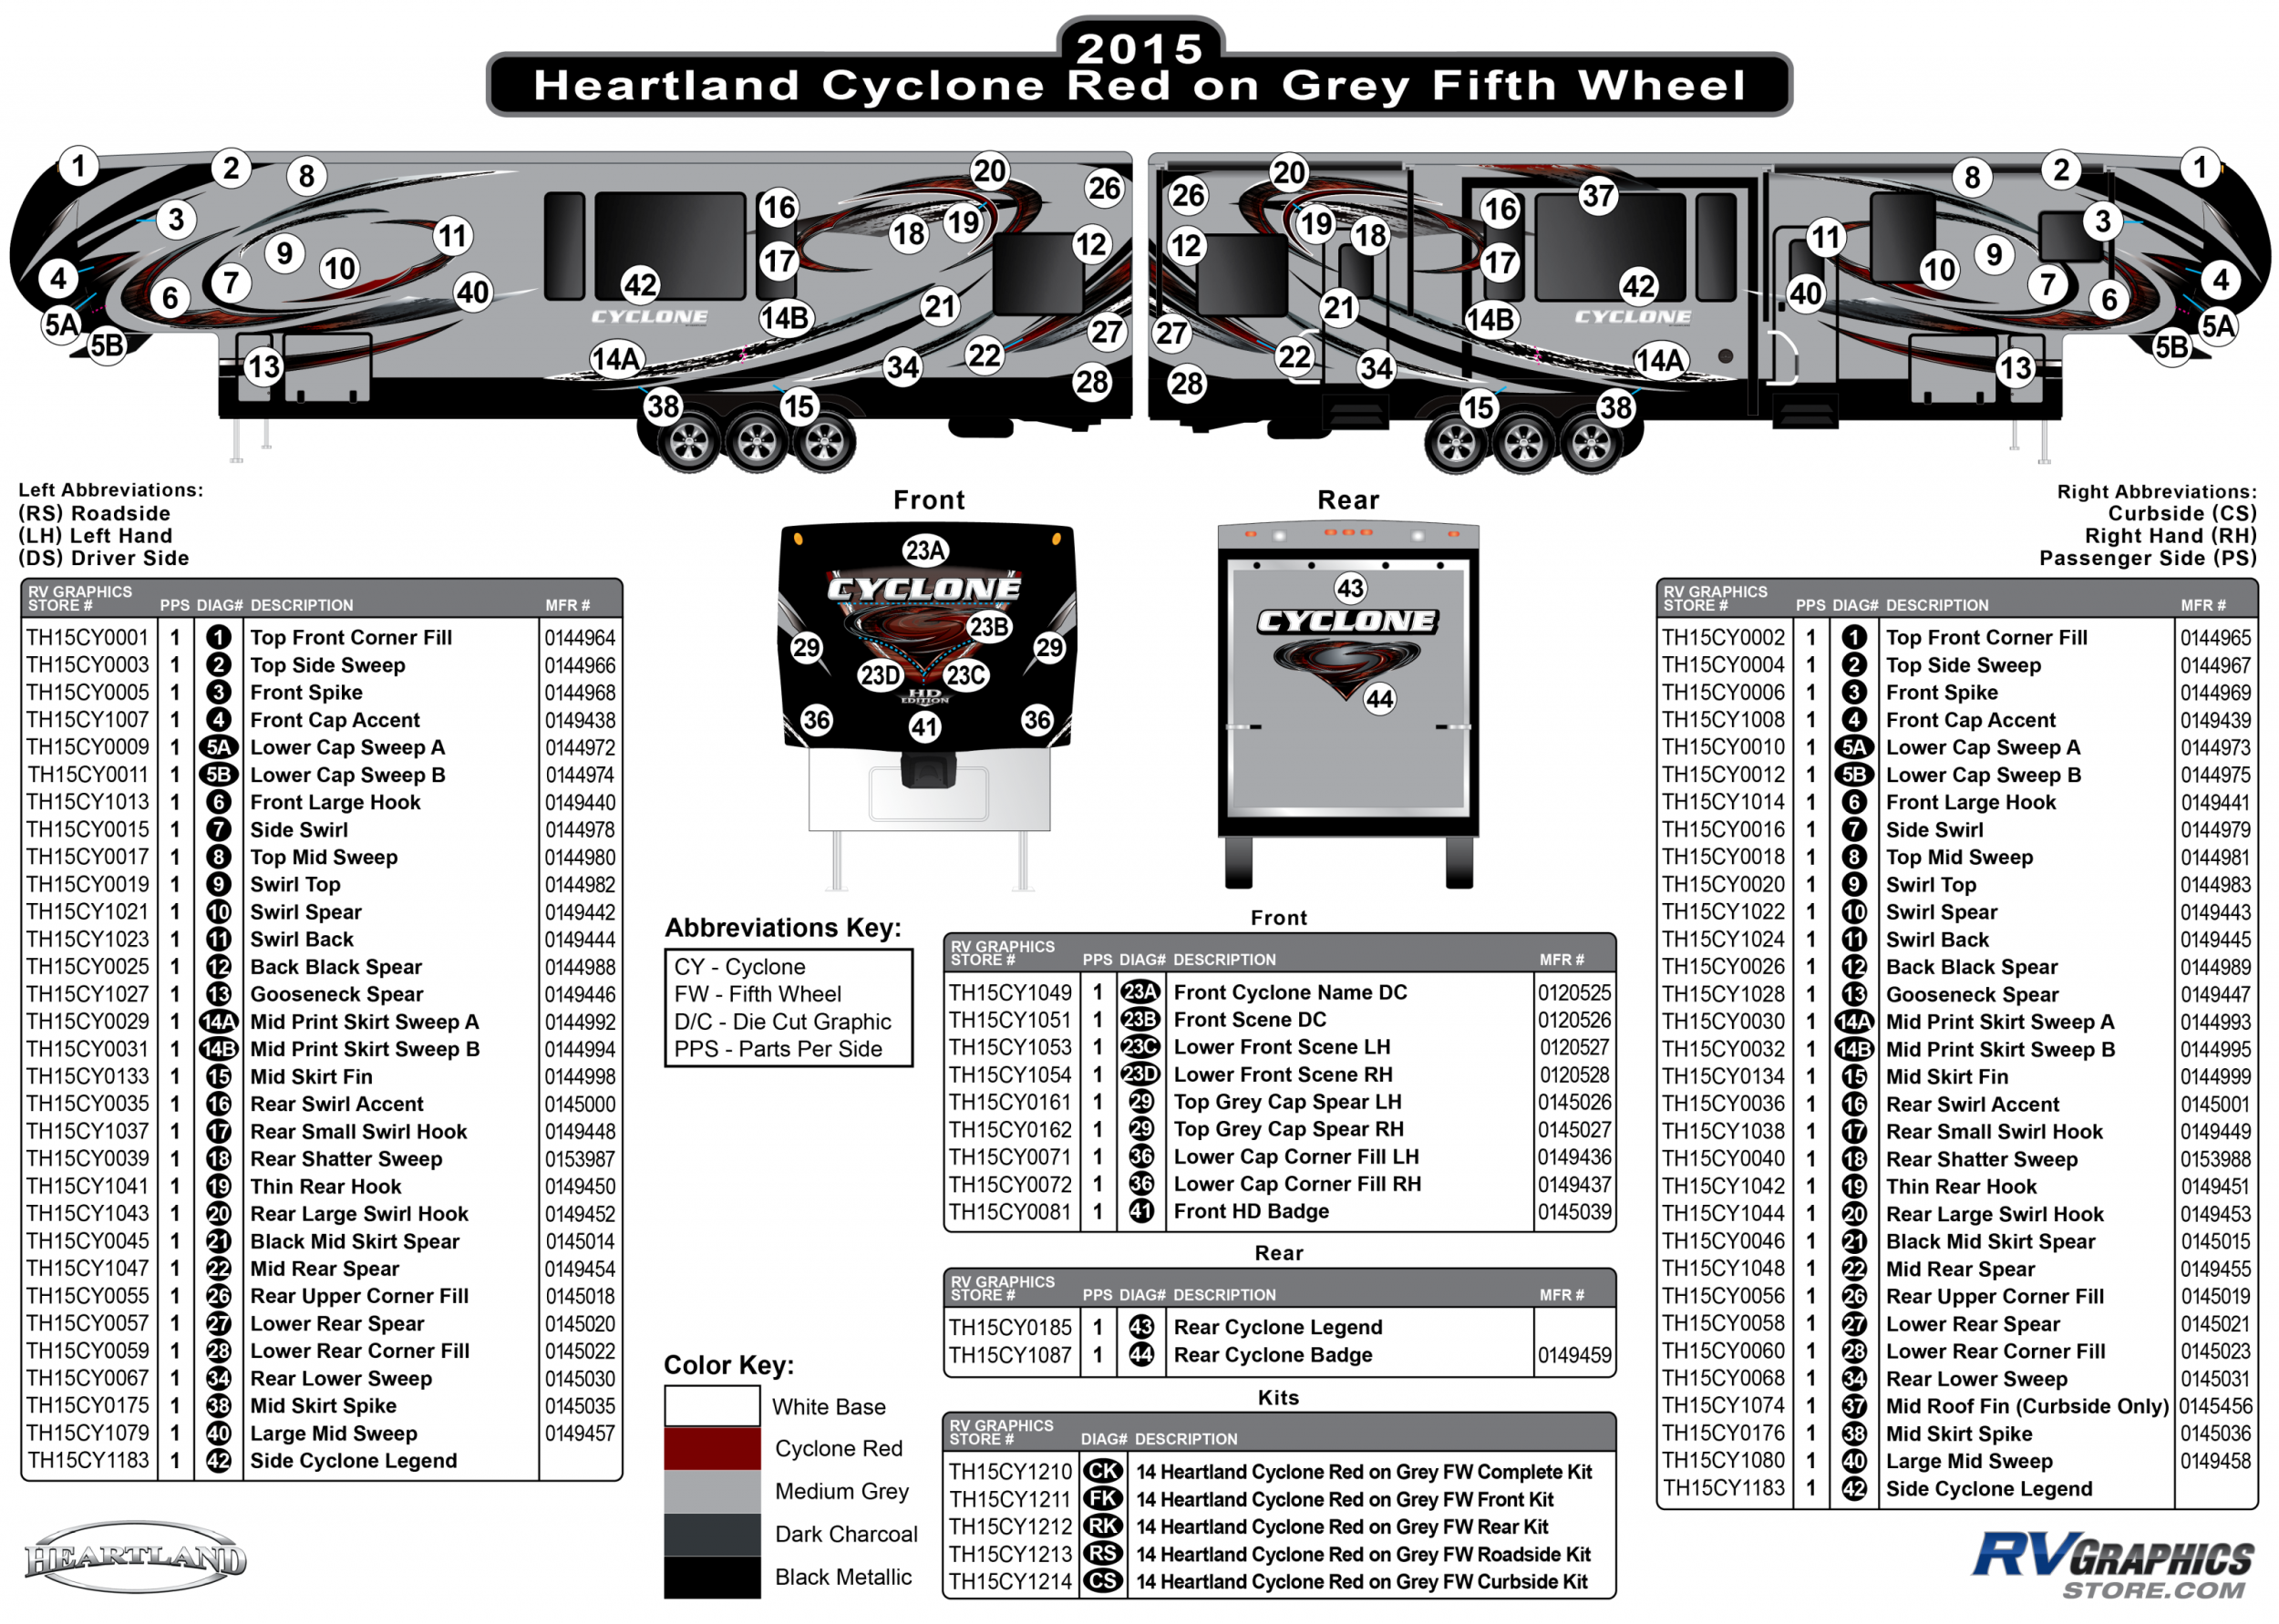 Cyclone - 2015 Cyclone FW-Fifth Wheel Red on Gray